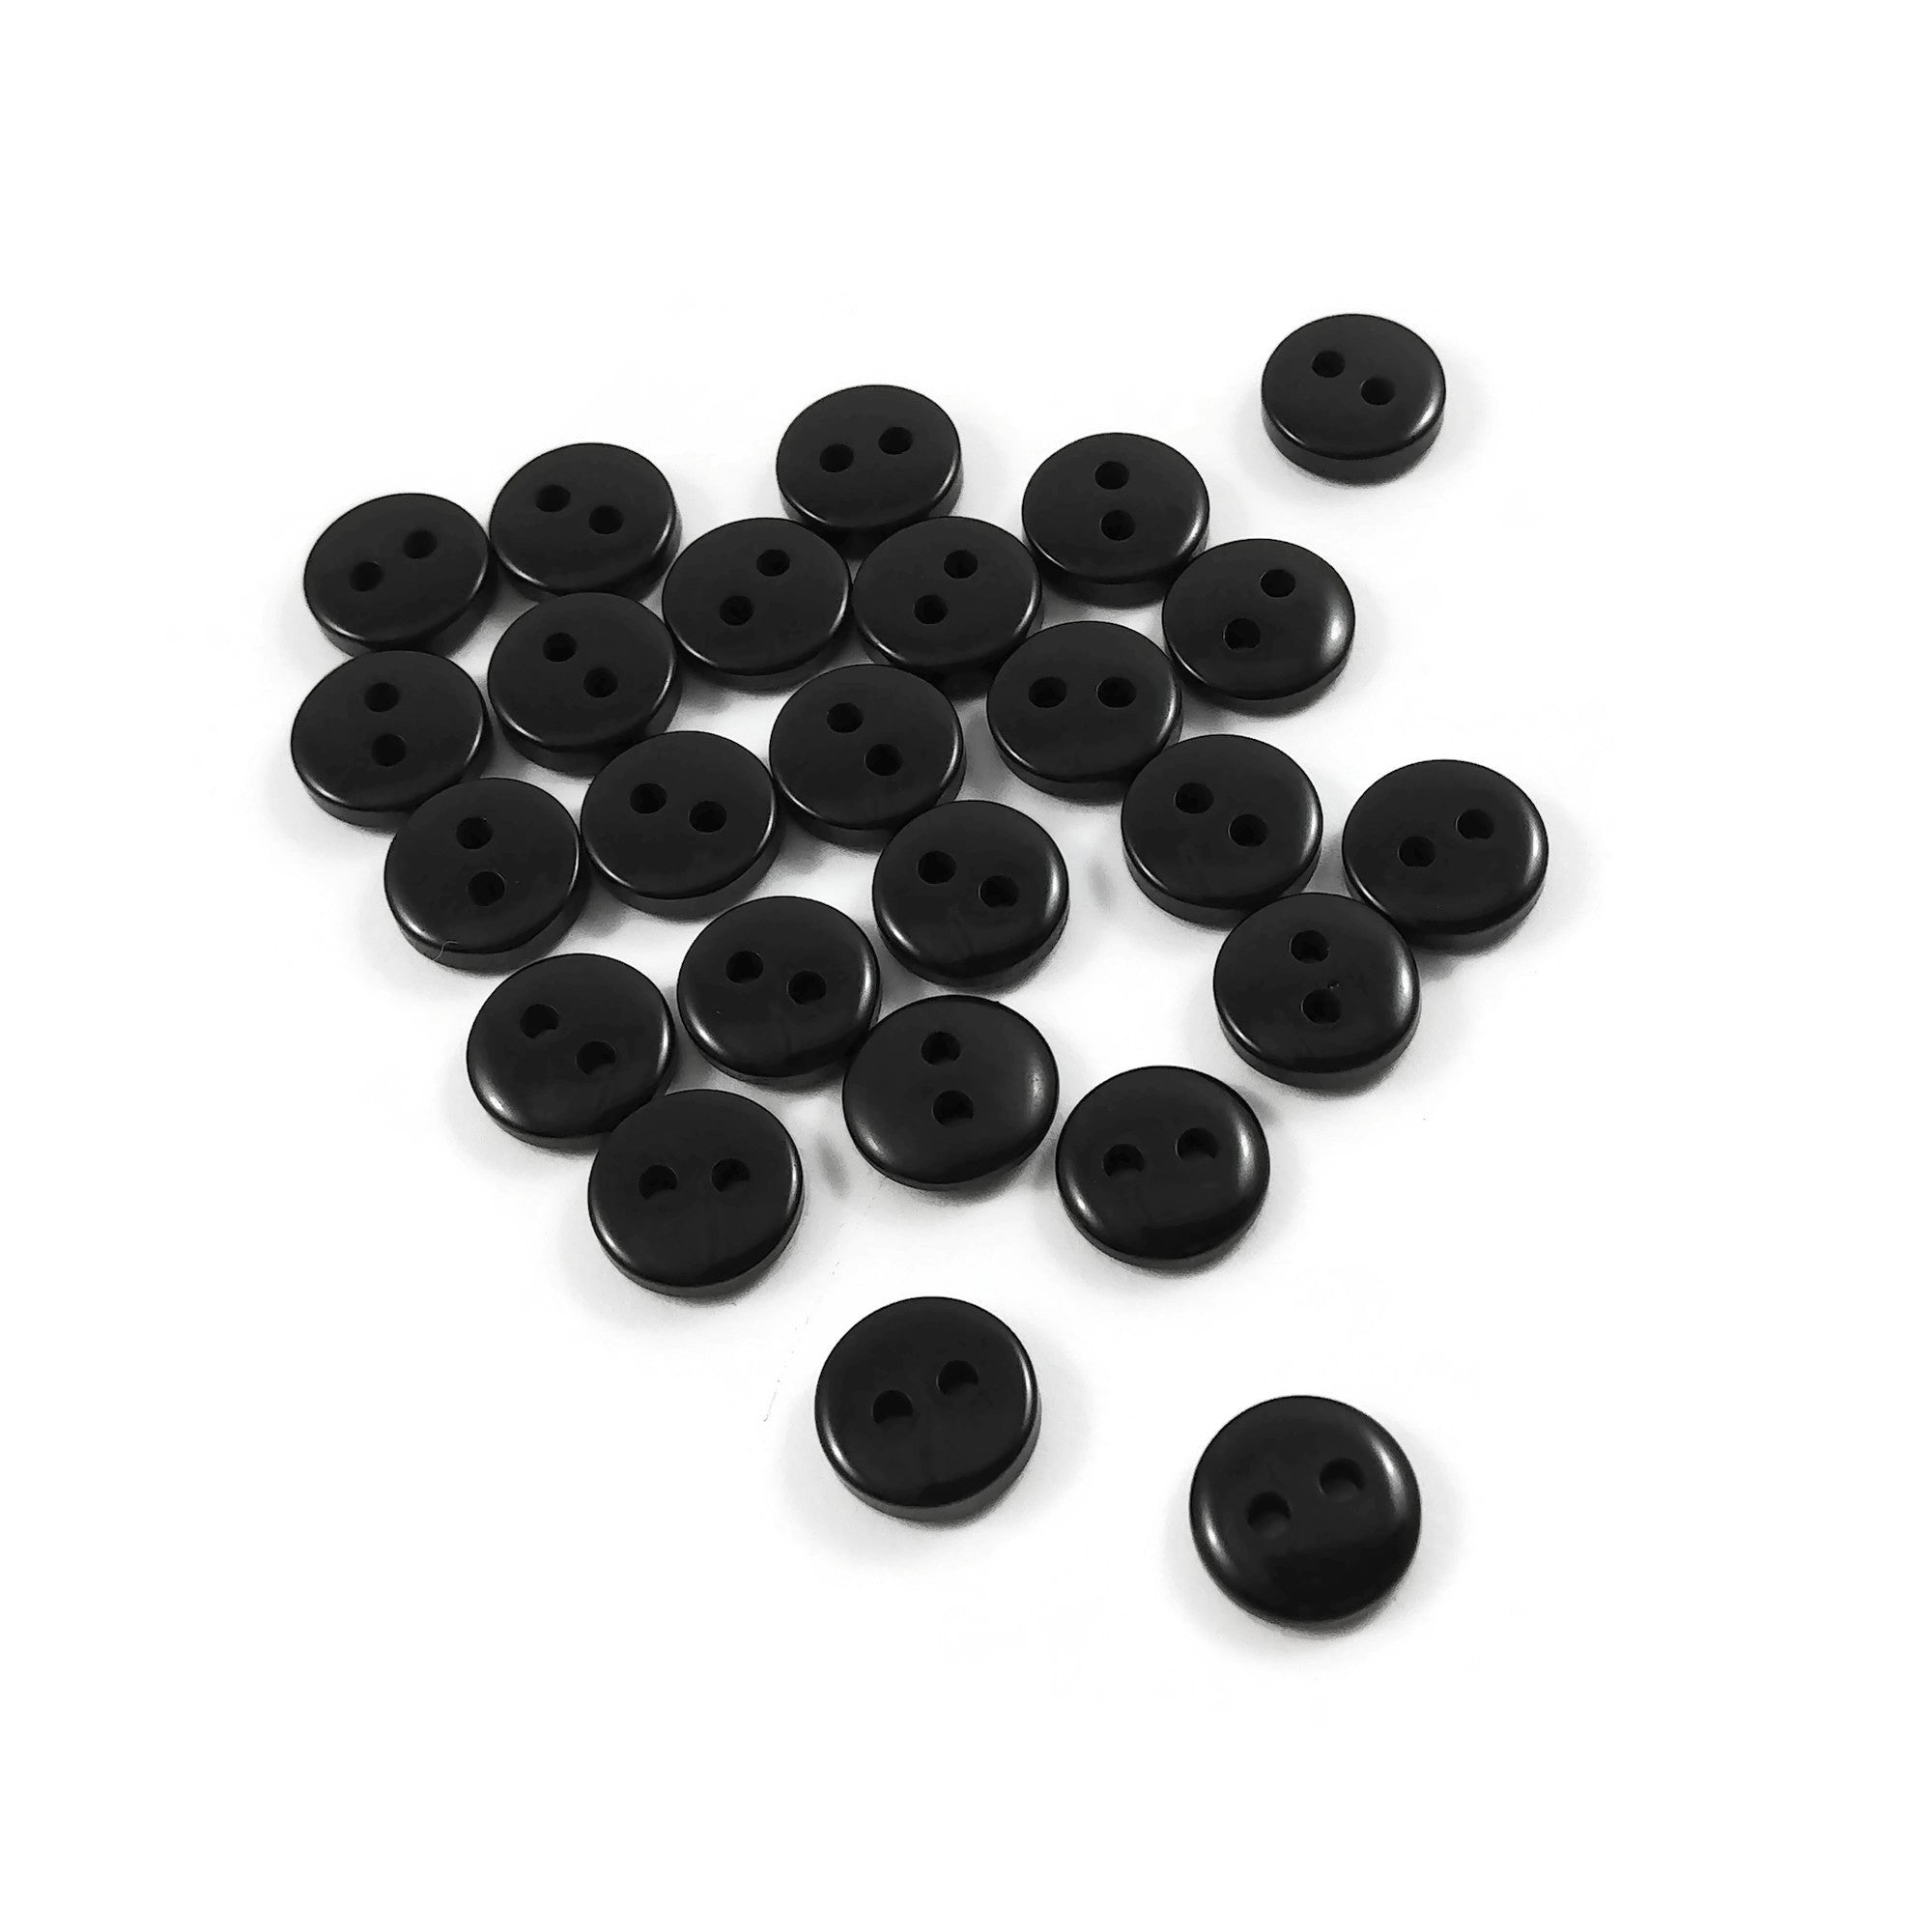 9mm black plastic buttons, Small resin sewing buttons, Craft supplies